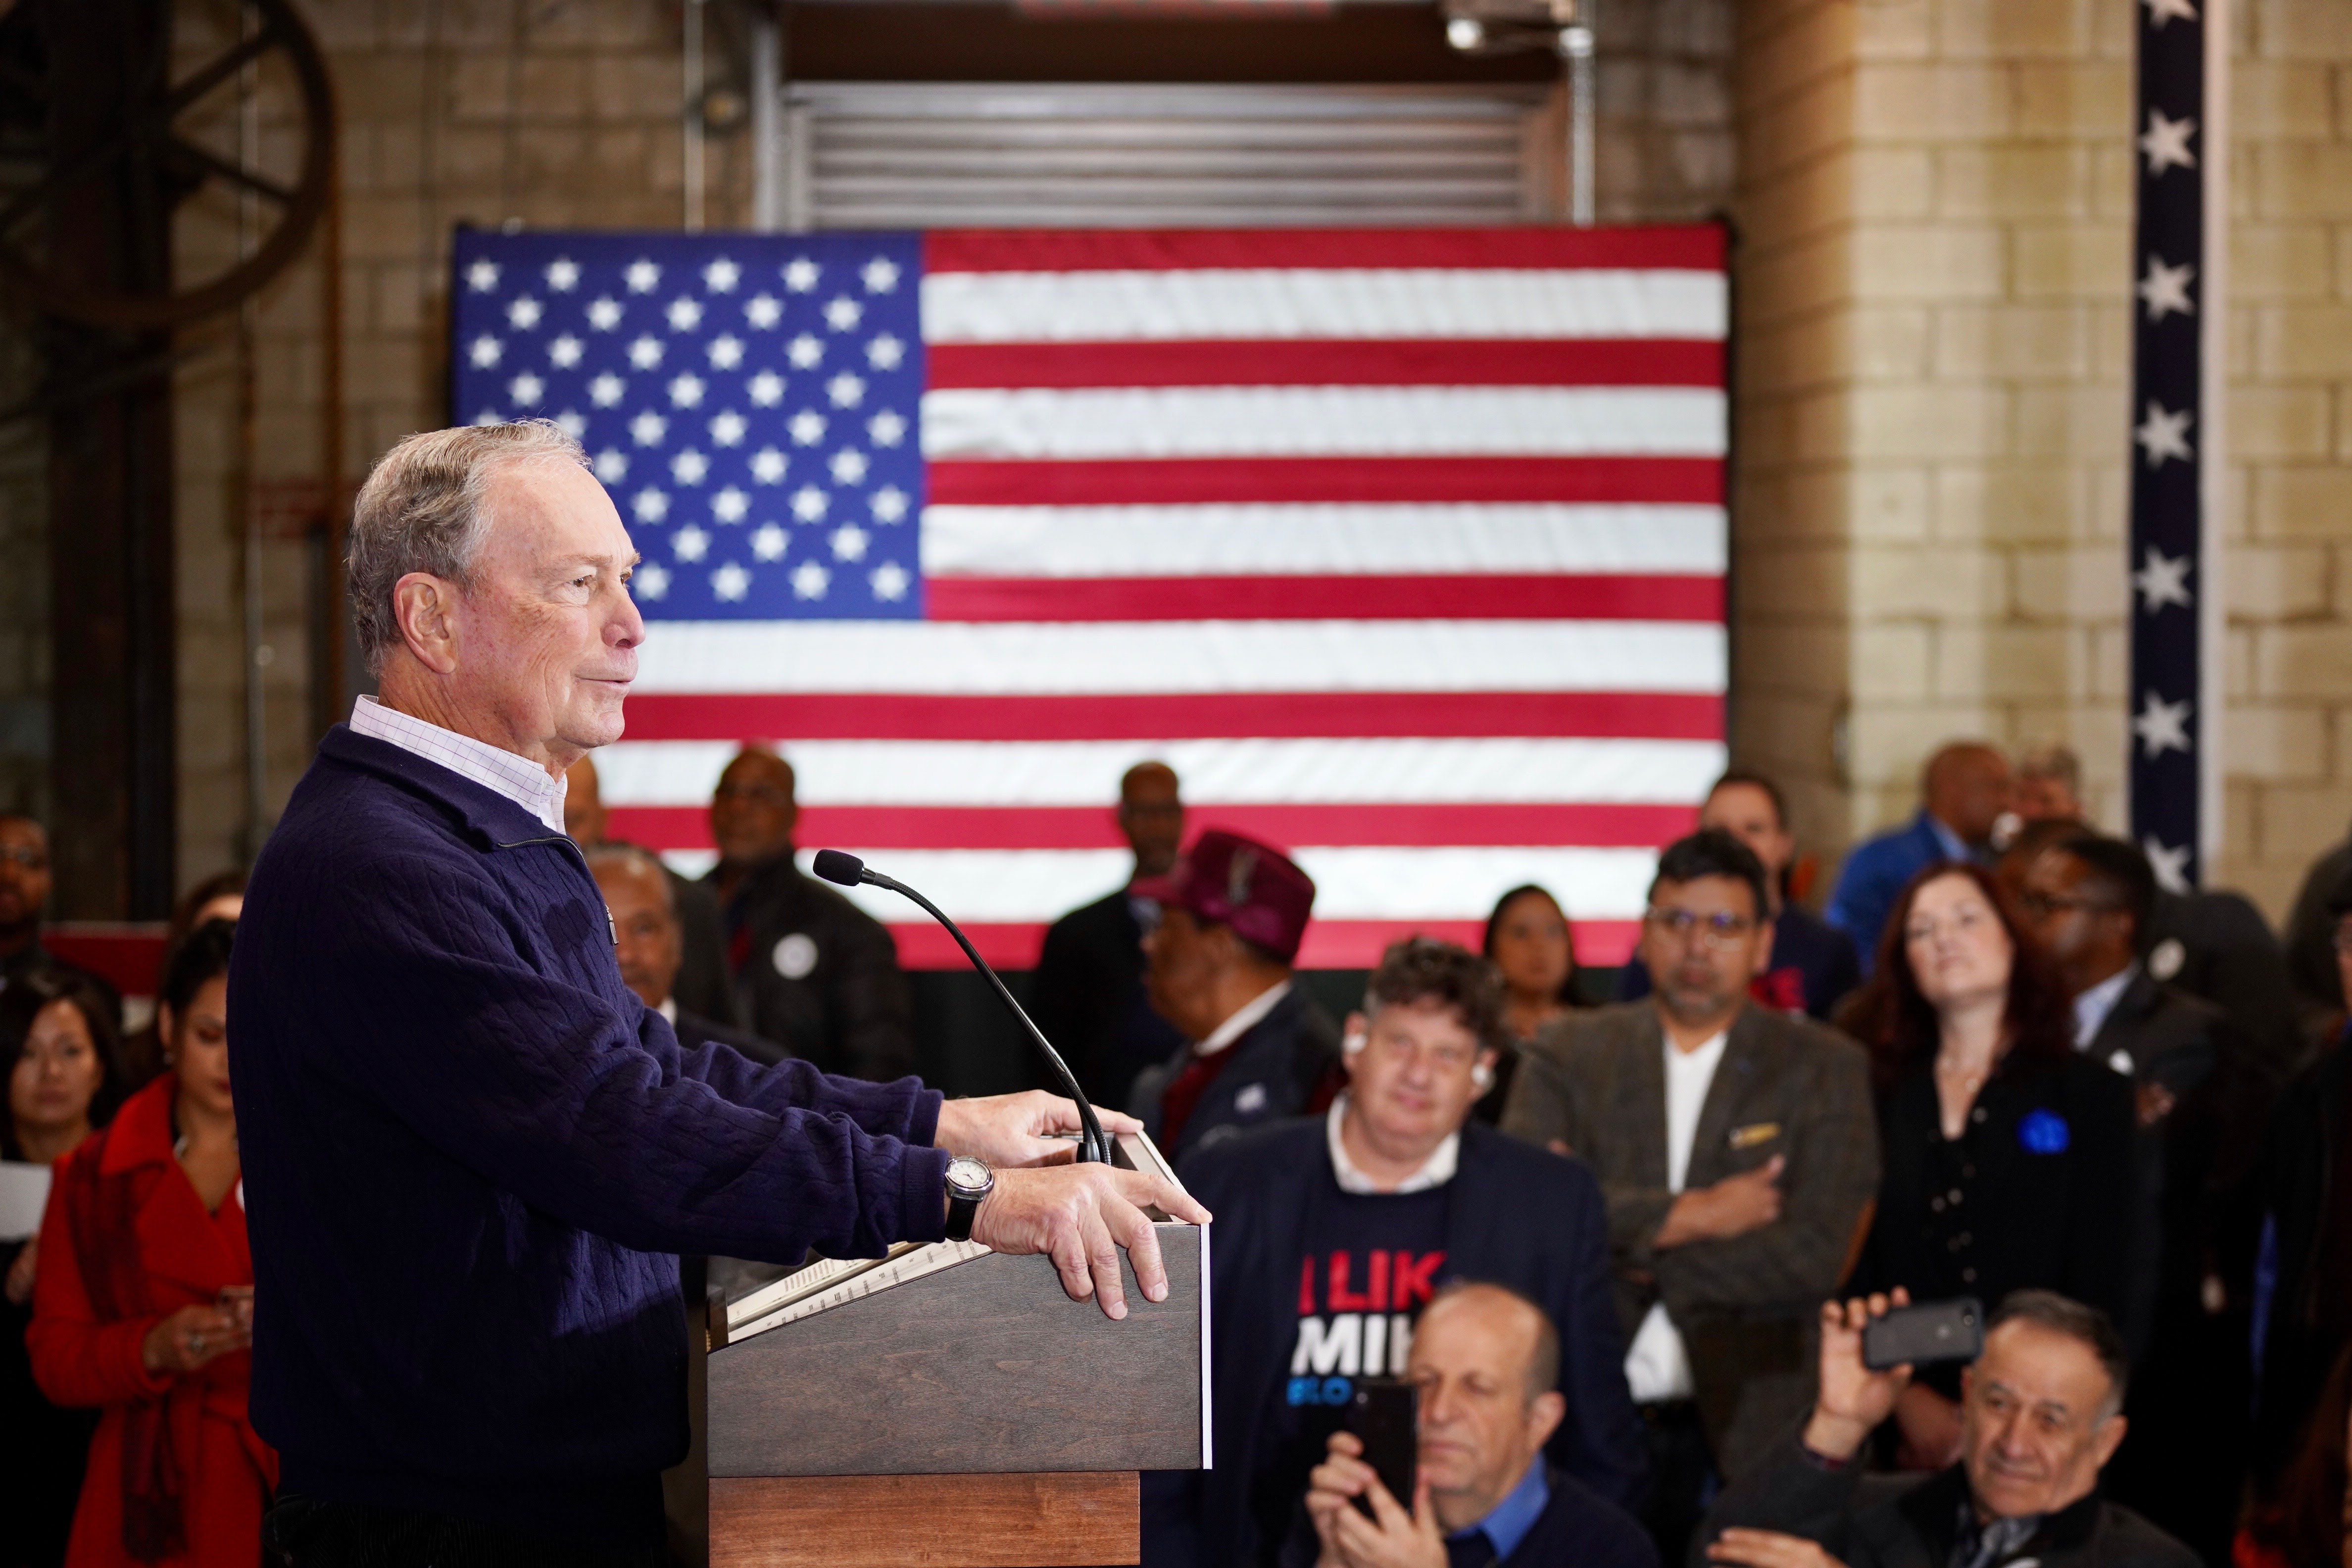 Mike Bloomberg celebrates the opening of the Mike 2020 campaign office in Detroit, Michigan on December 21, 2019.